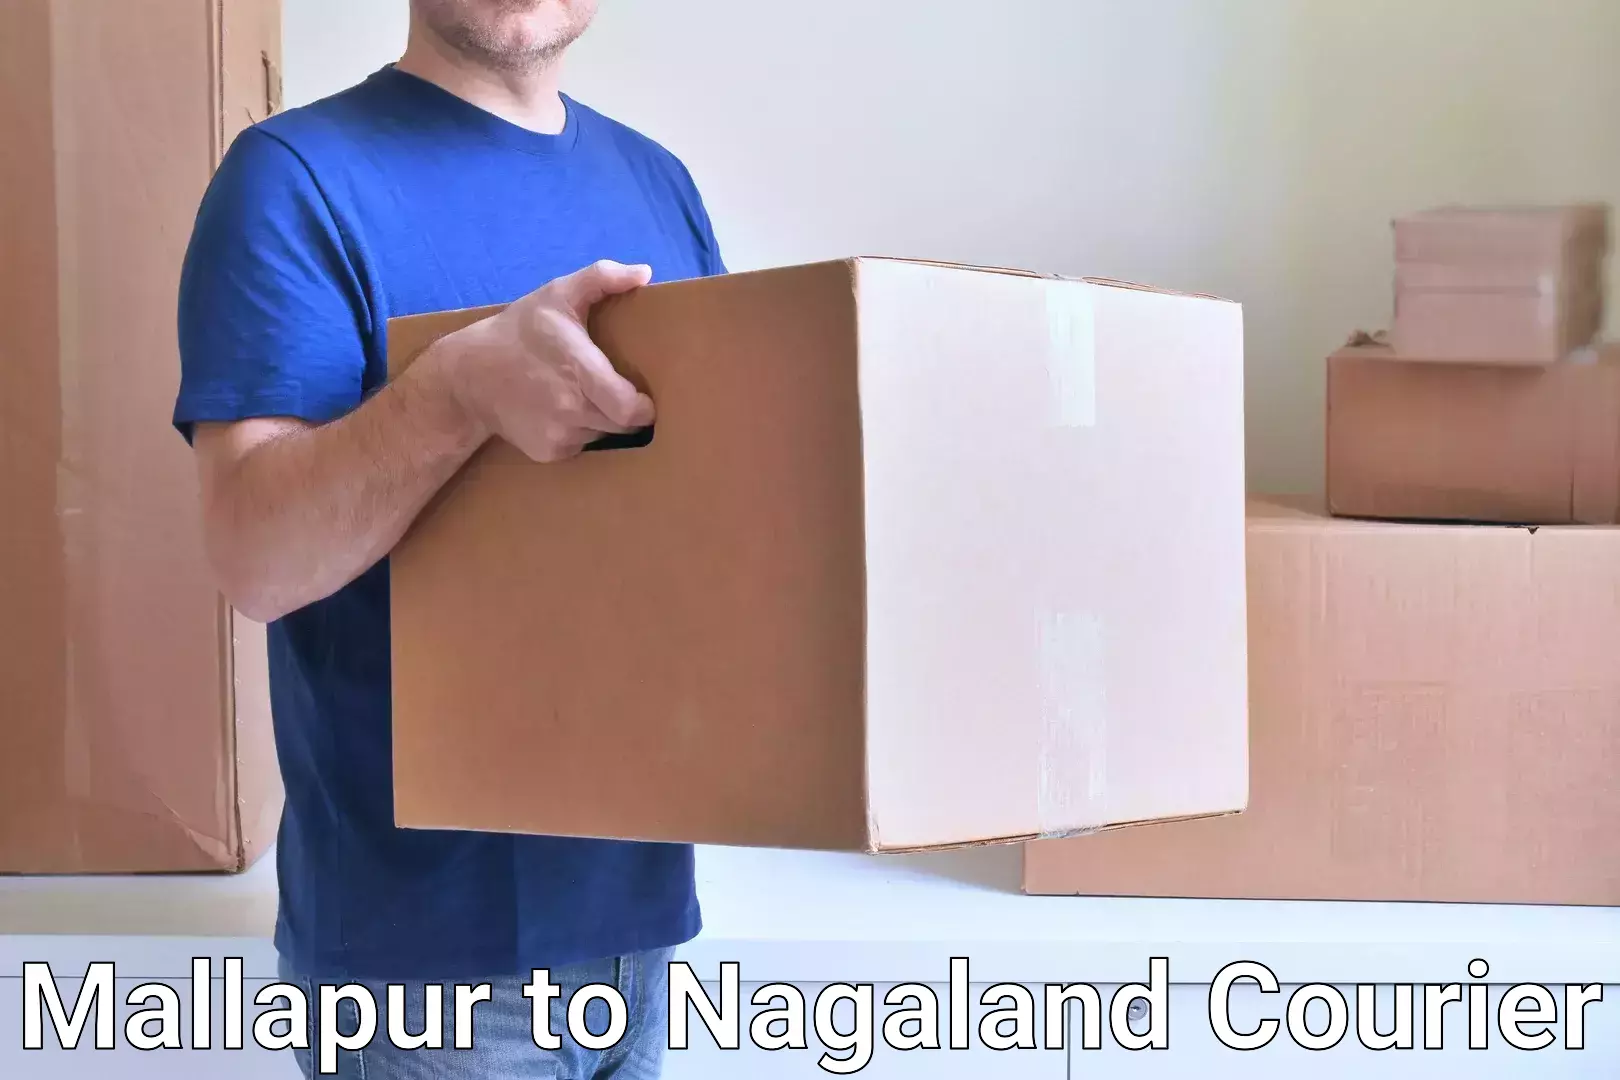 User-friendly courier app Mallapur to Nagaland